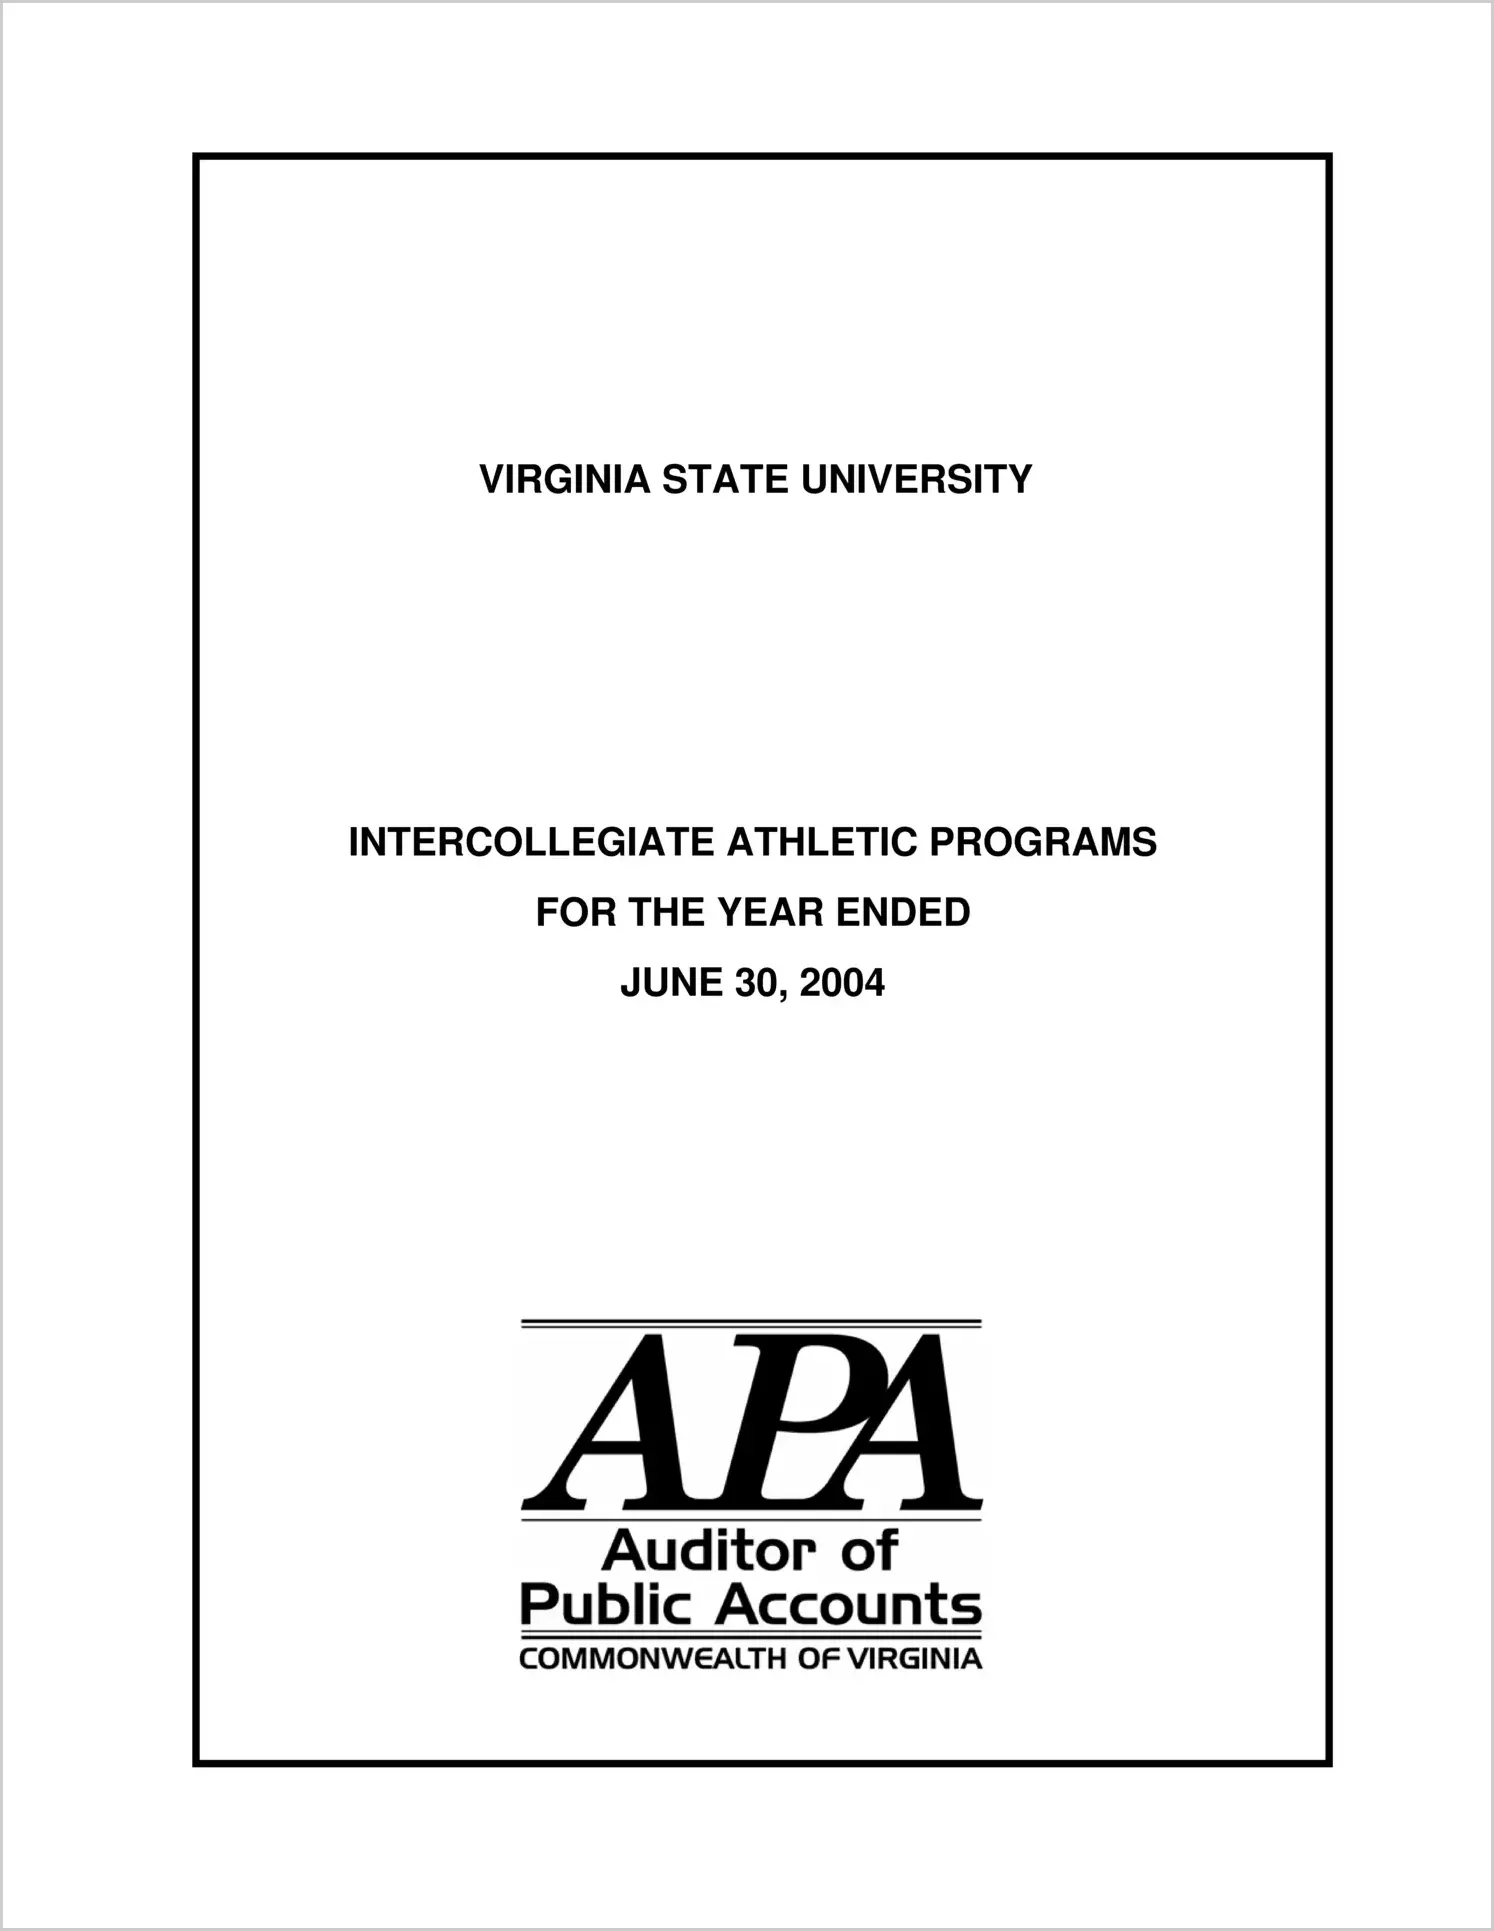 Virginia State University Intercollegiate Athletic Programs for the year ended June 30, 2004